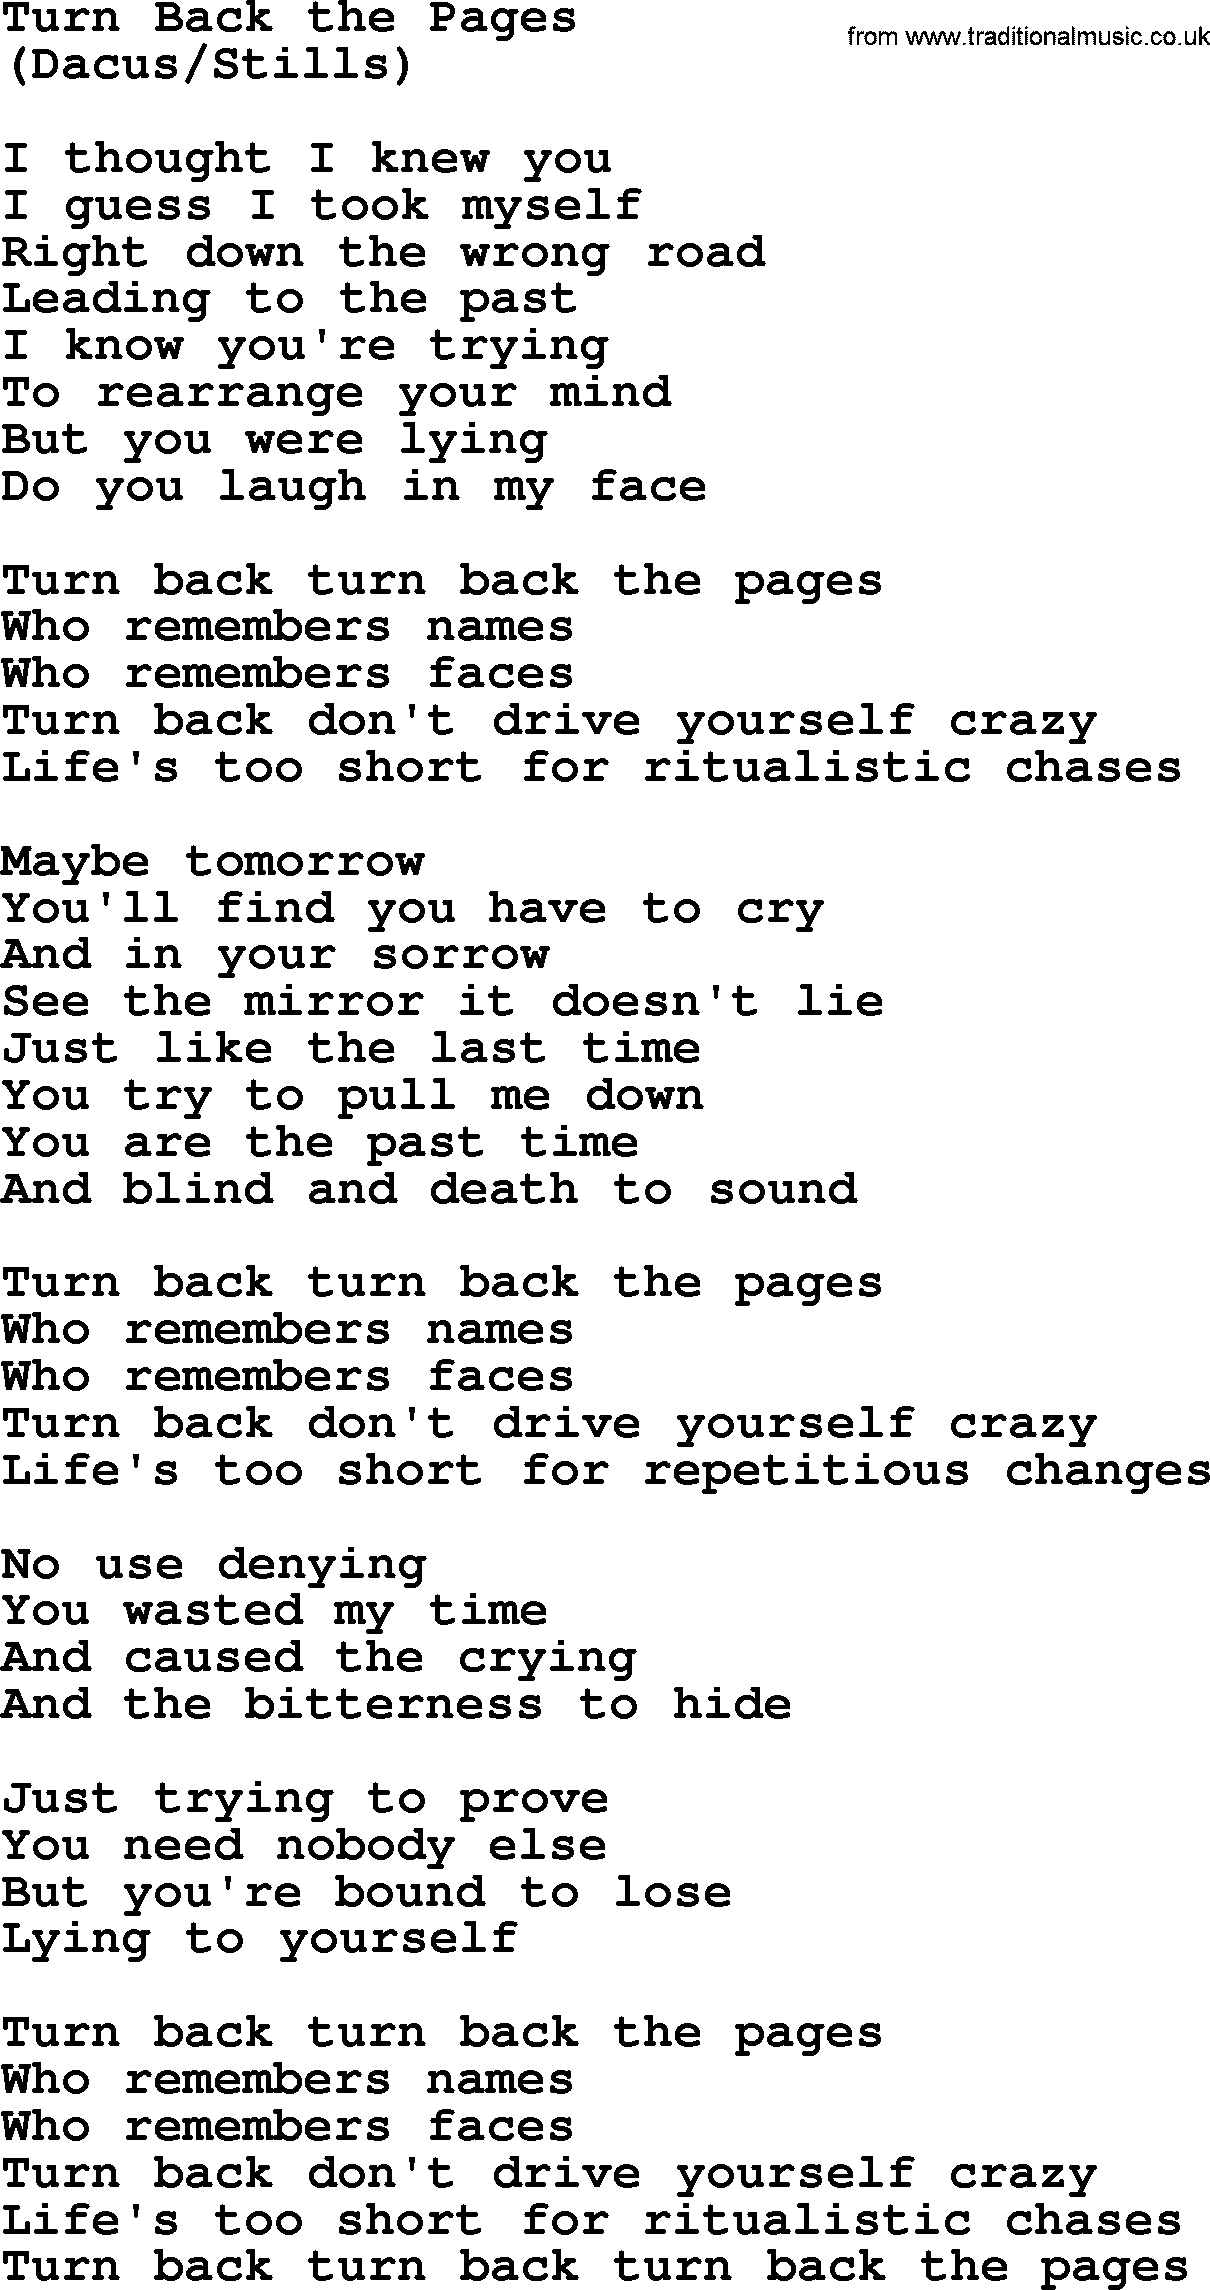 The Byrds song Turn Back The Pages, lyrics